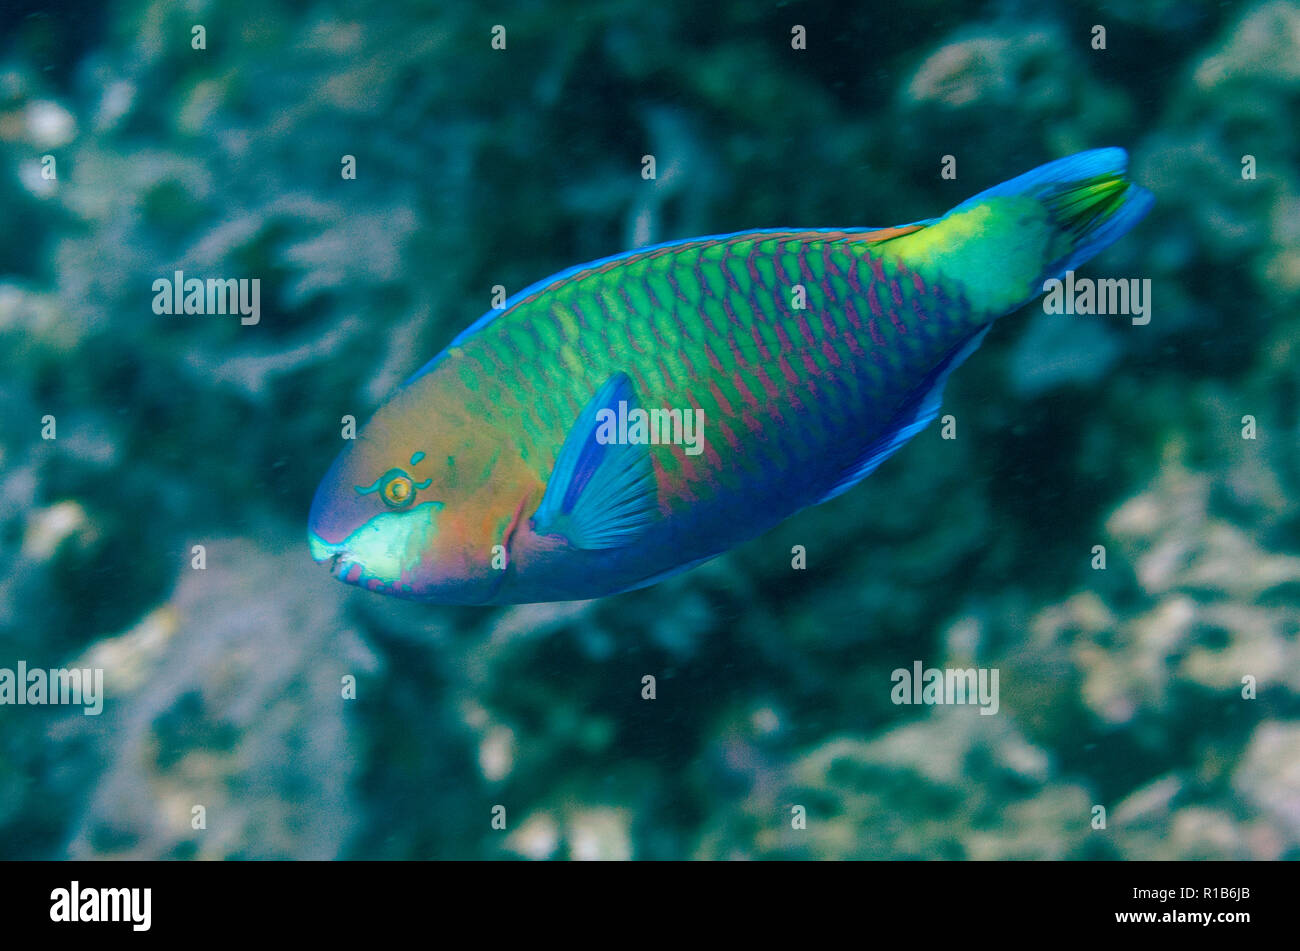 Quoy's Parrotfish, Scarus quoyi, California Dreaming dive site, Lembeh Straits, Sulawesi, Indonesia Stock Photo